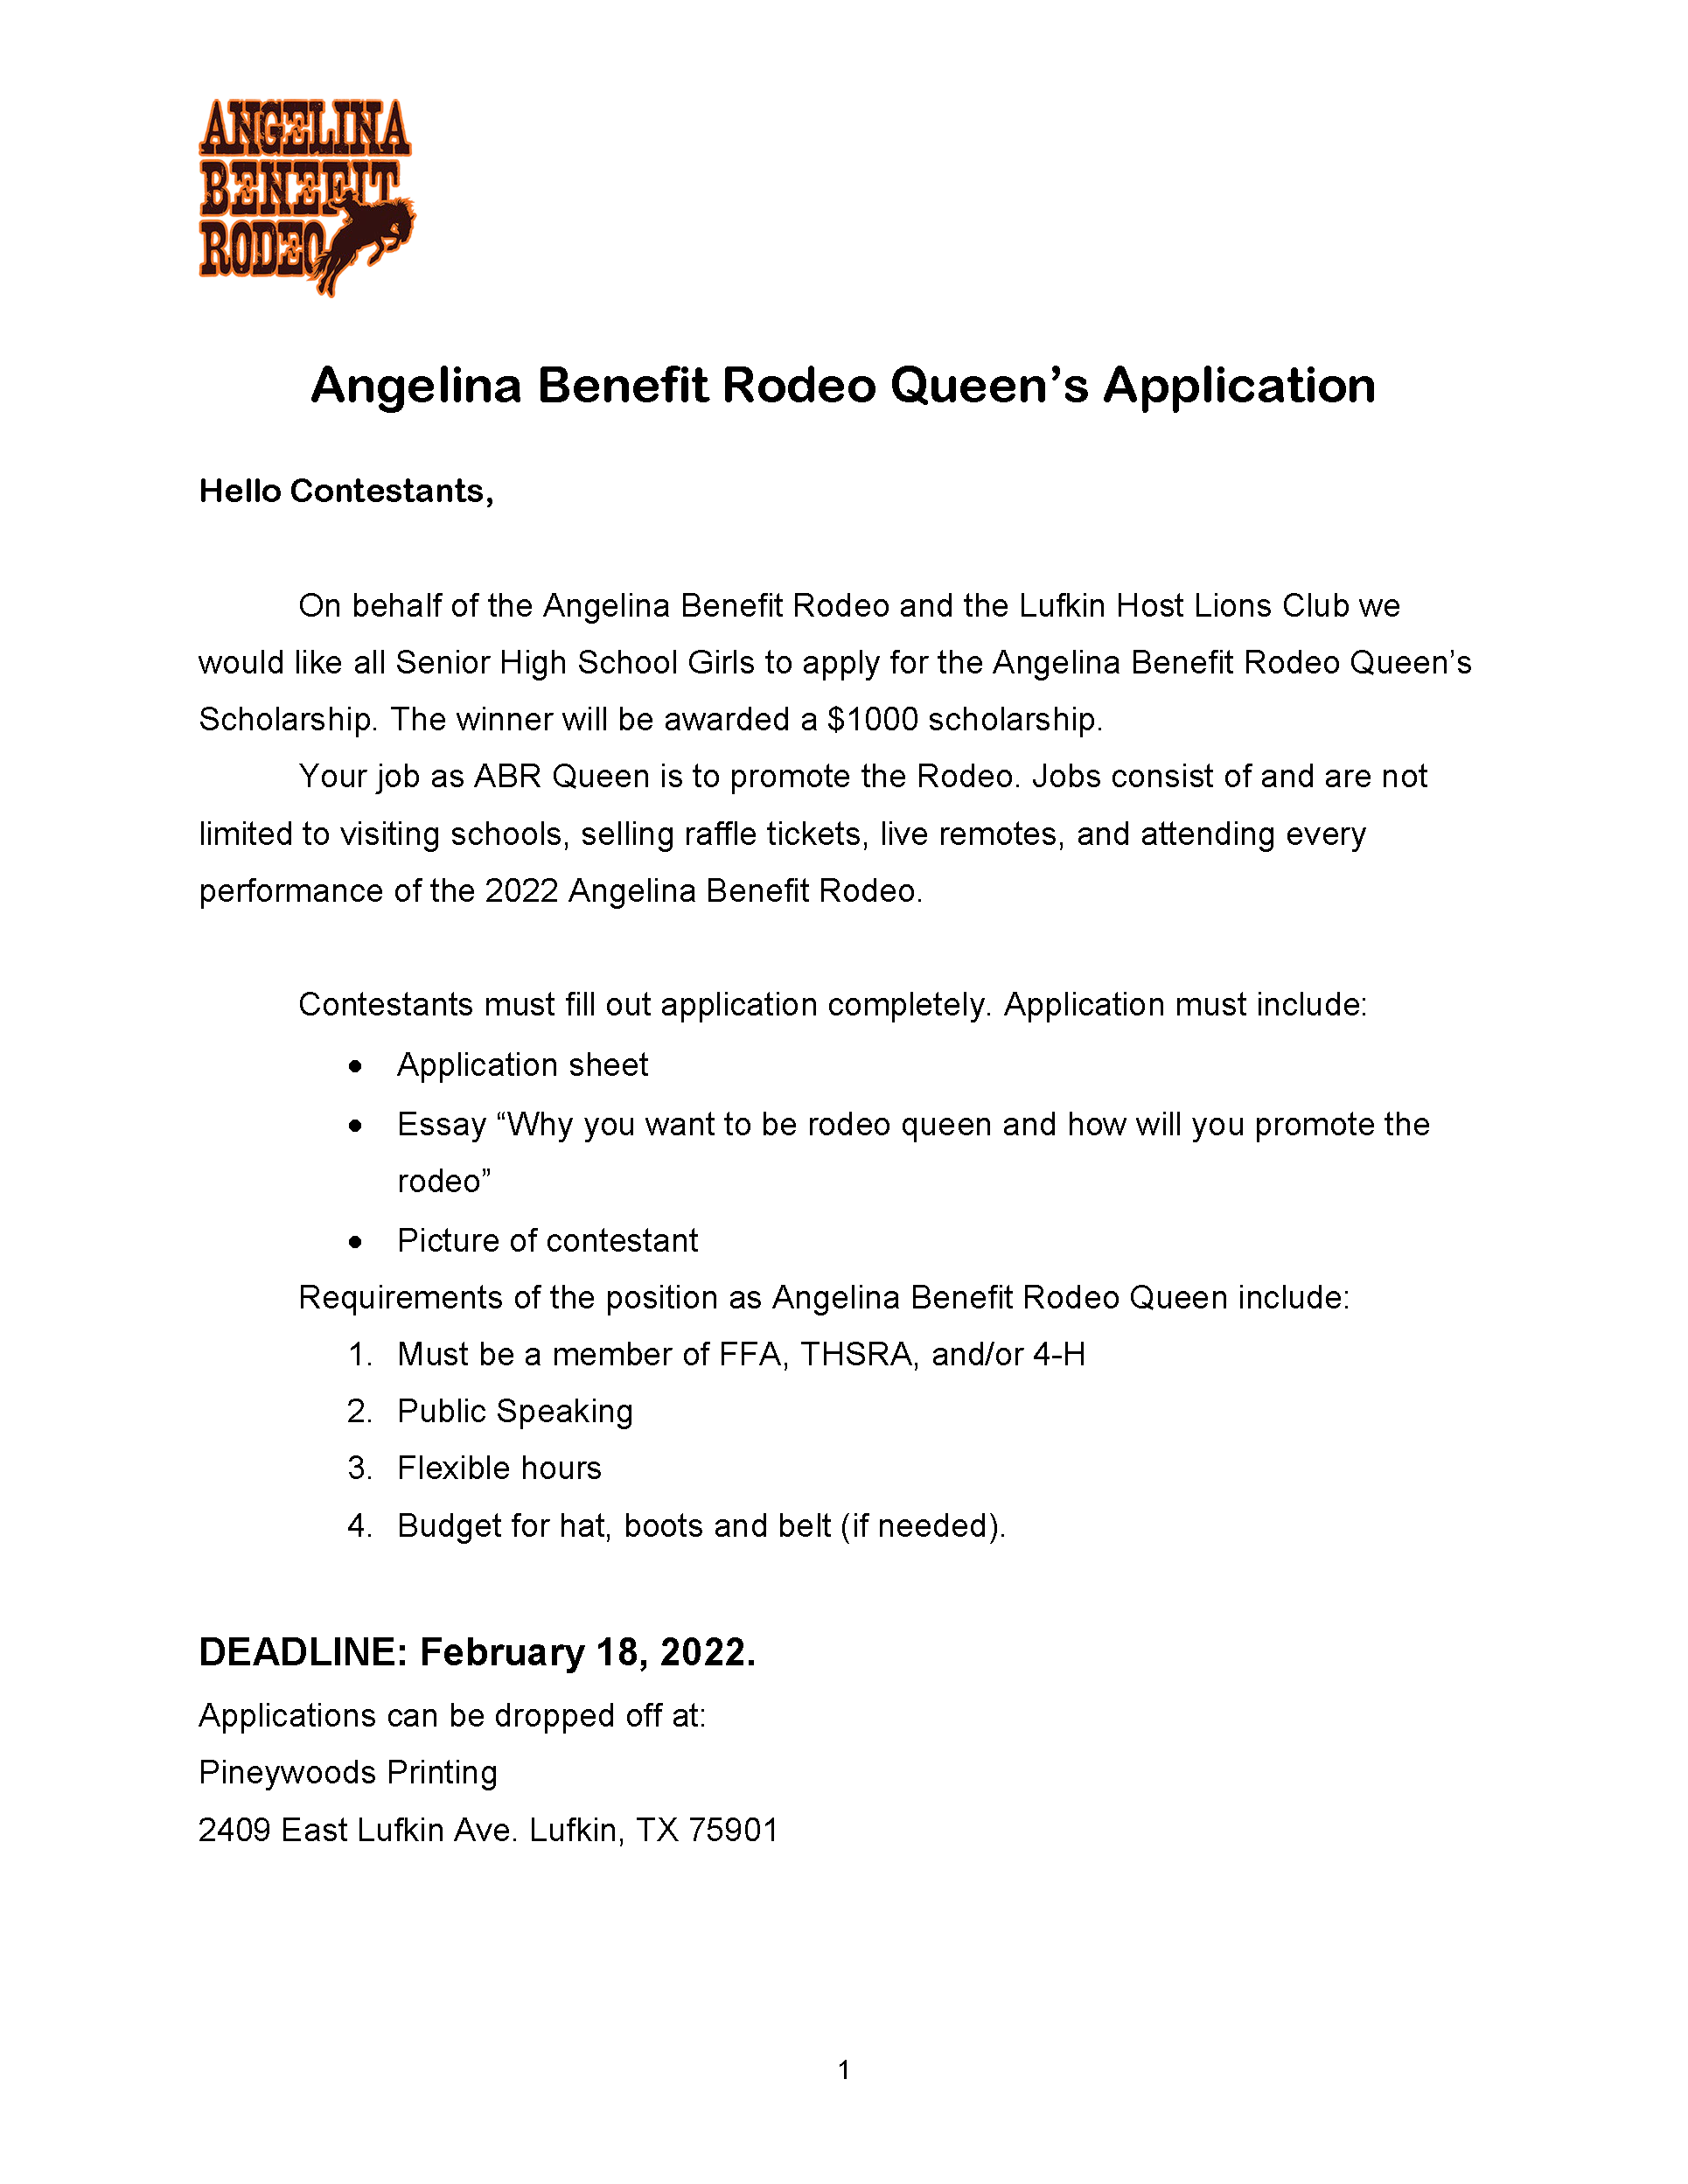 angelina benefit rodeo queen application 2022_Page_1